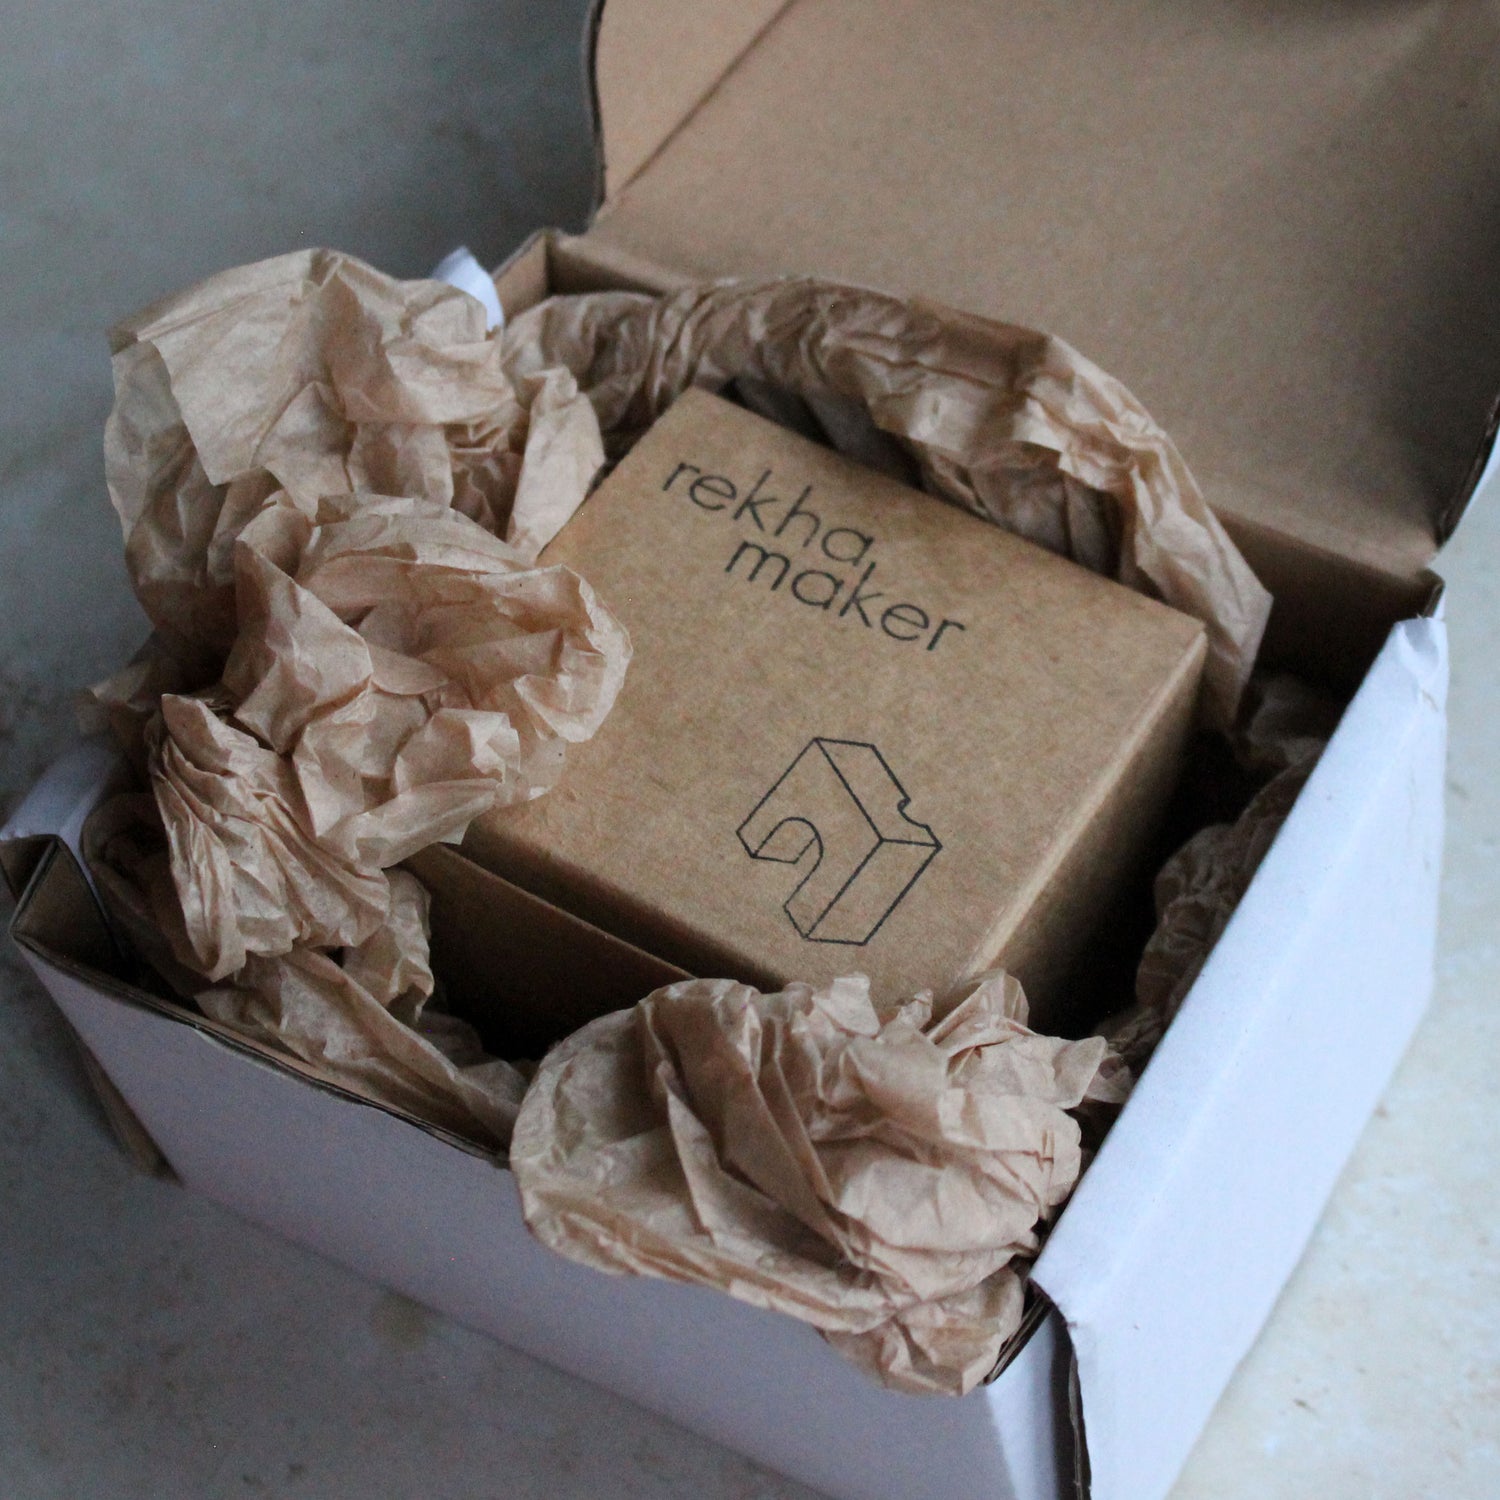 Unwrapping a Rekha Maker candleholder in her sustainable packaging.